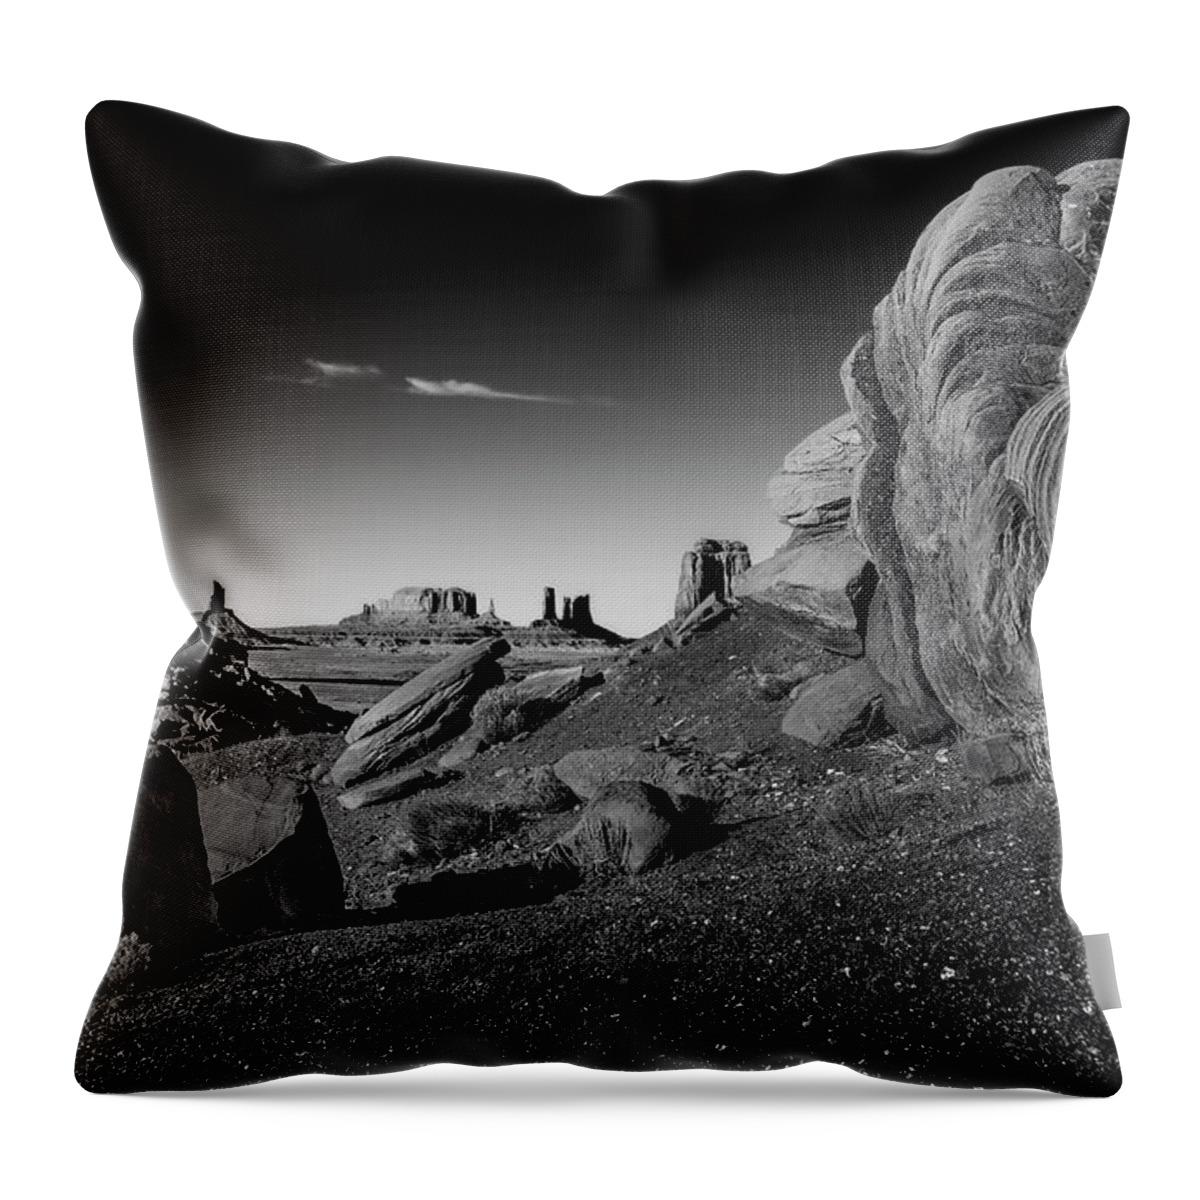 Utah Throw Pillow featuring the photograph Monument Valley Rock Formations by Phil Cardamone